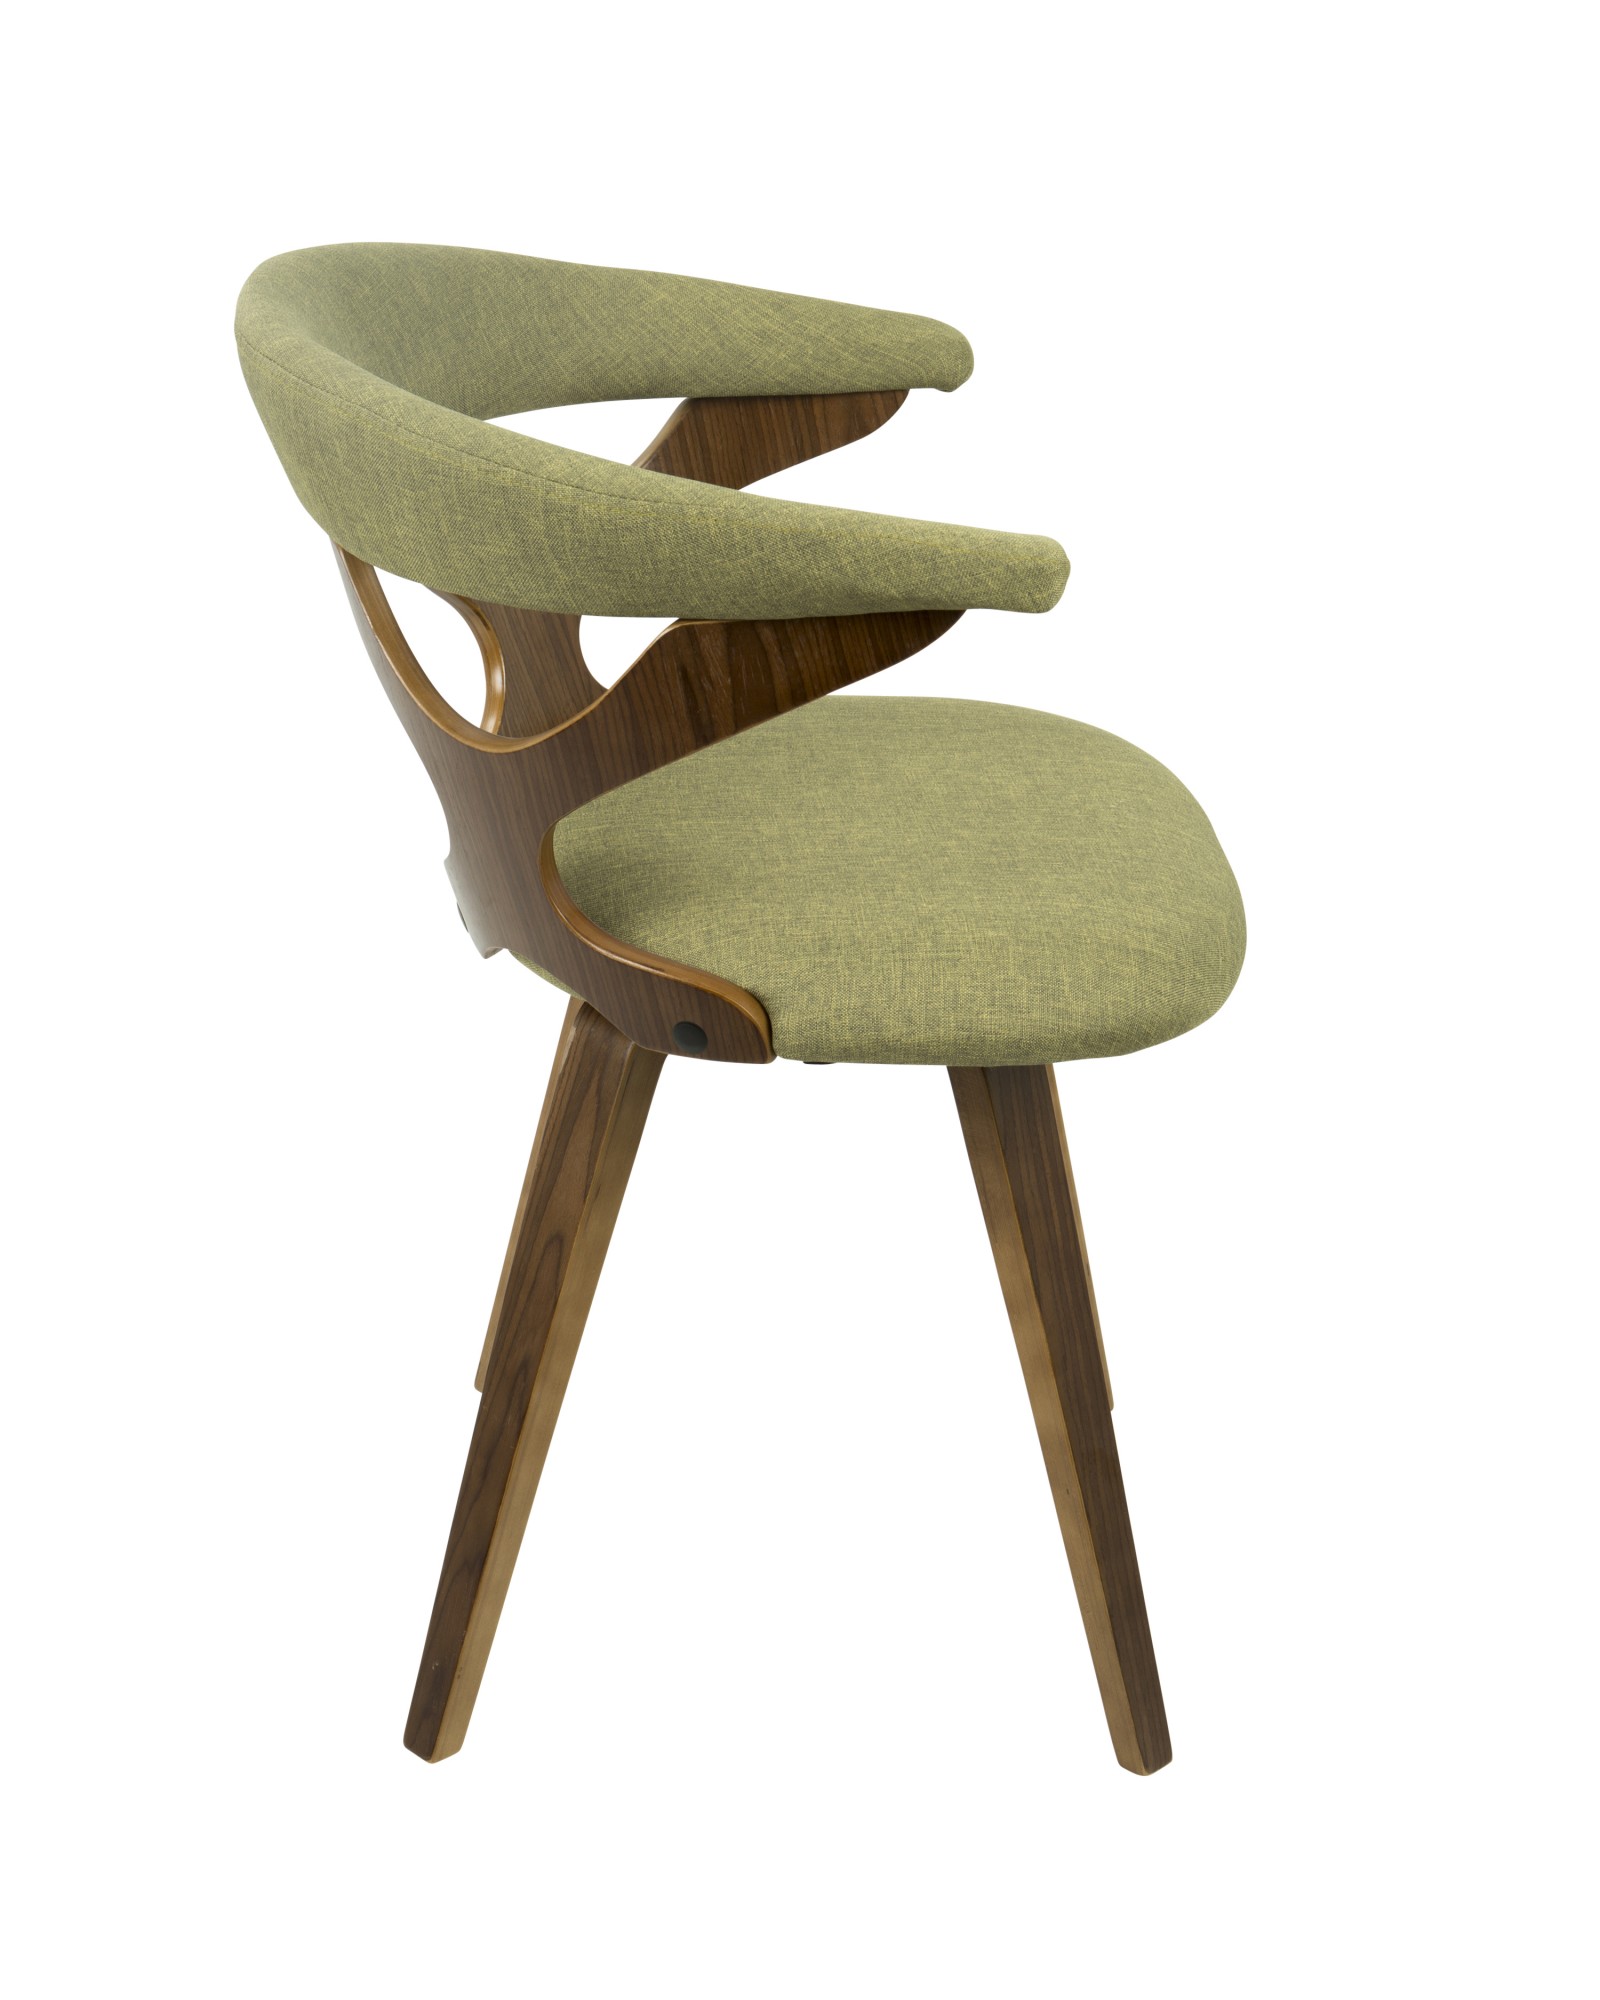 Gardenia Mid-Century Modern Dining/Accent Chair with Swivel in Walnut Wood and Green Fabric